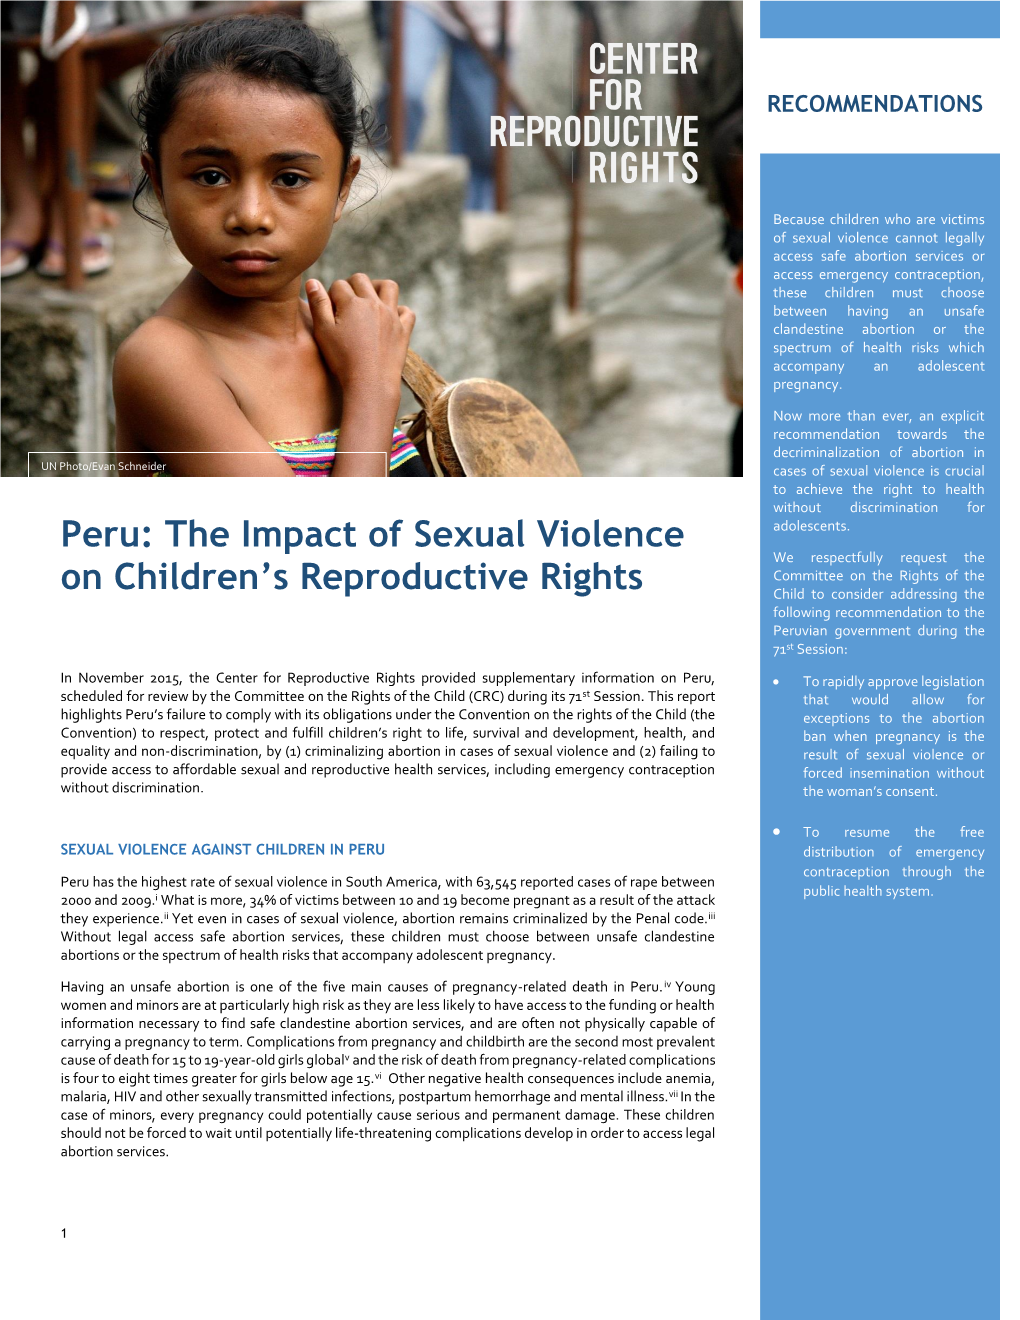 Peru: the Impact of Sexual Violence Adolescents